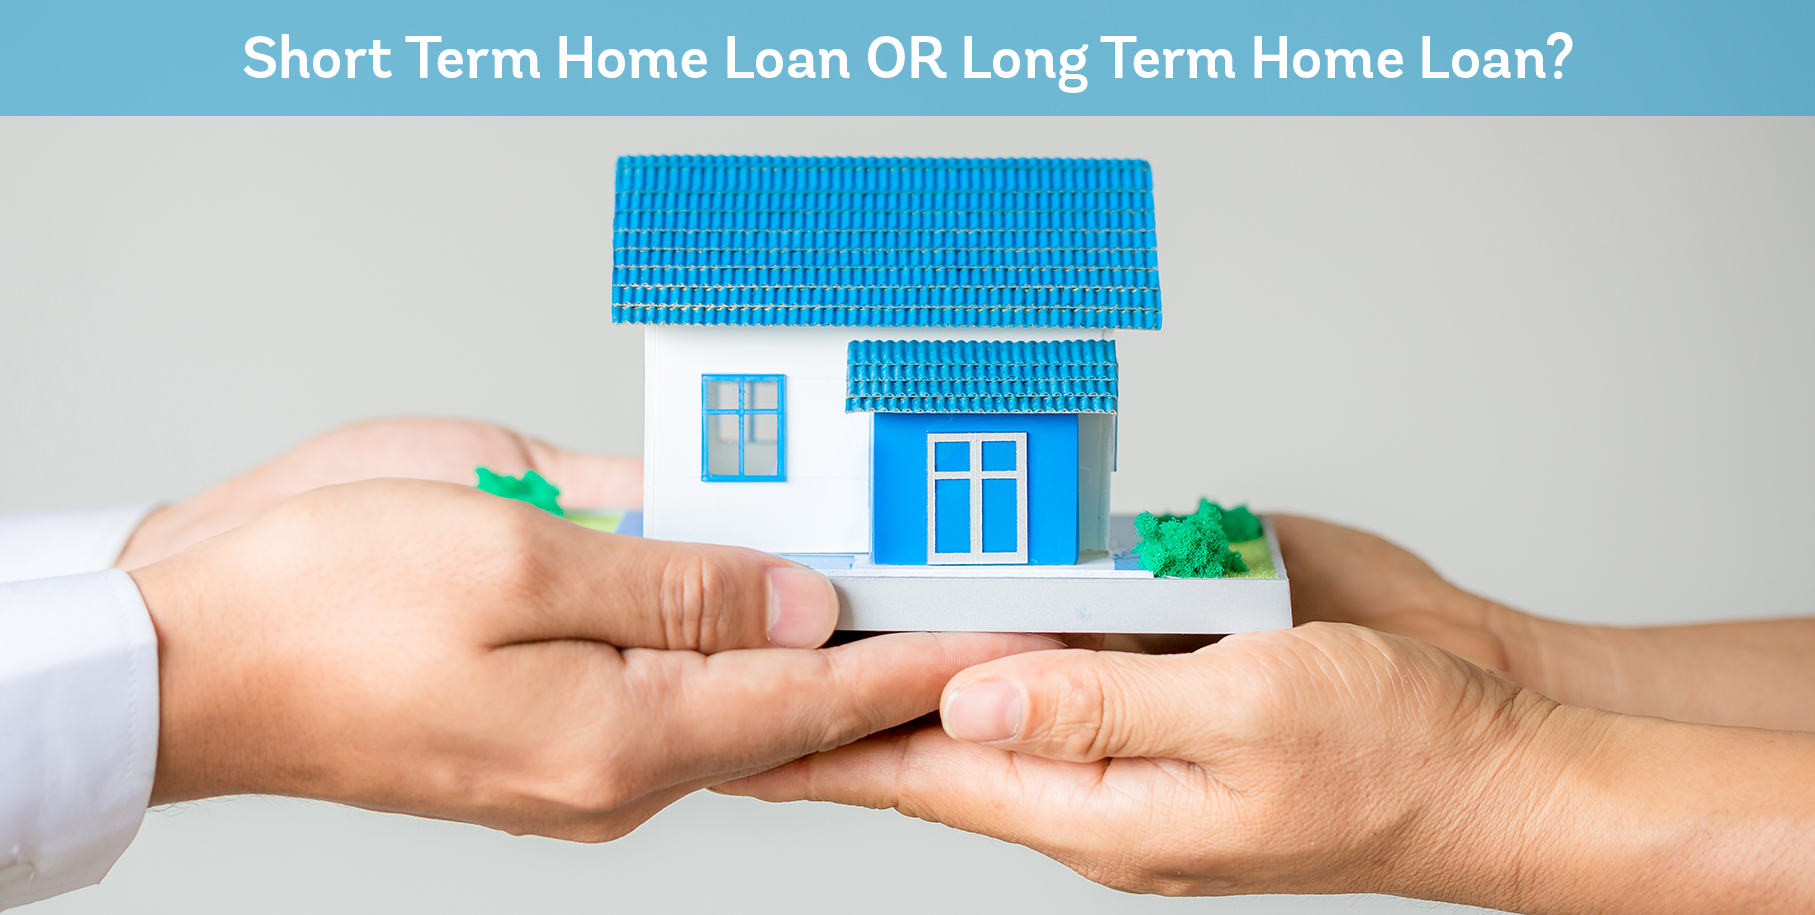 Home Loan Tenure: Short Term or Long Term? Which is the Best Option?